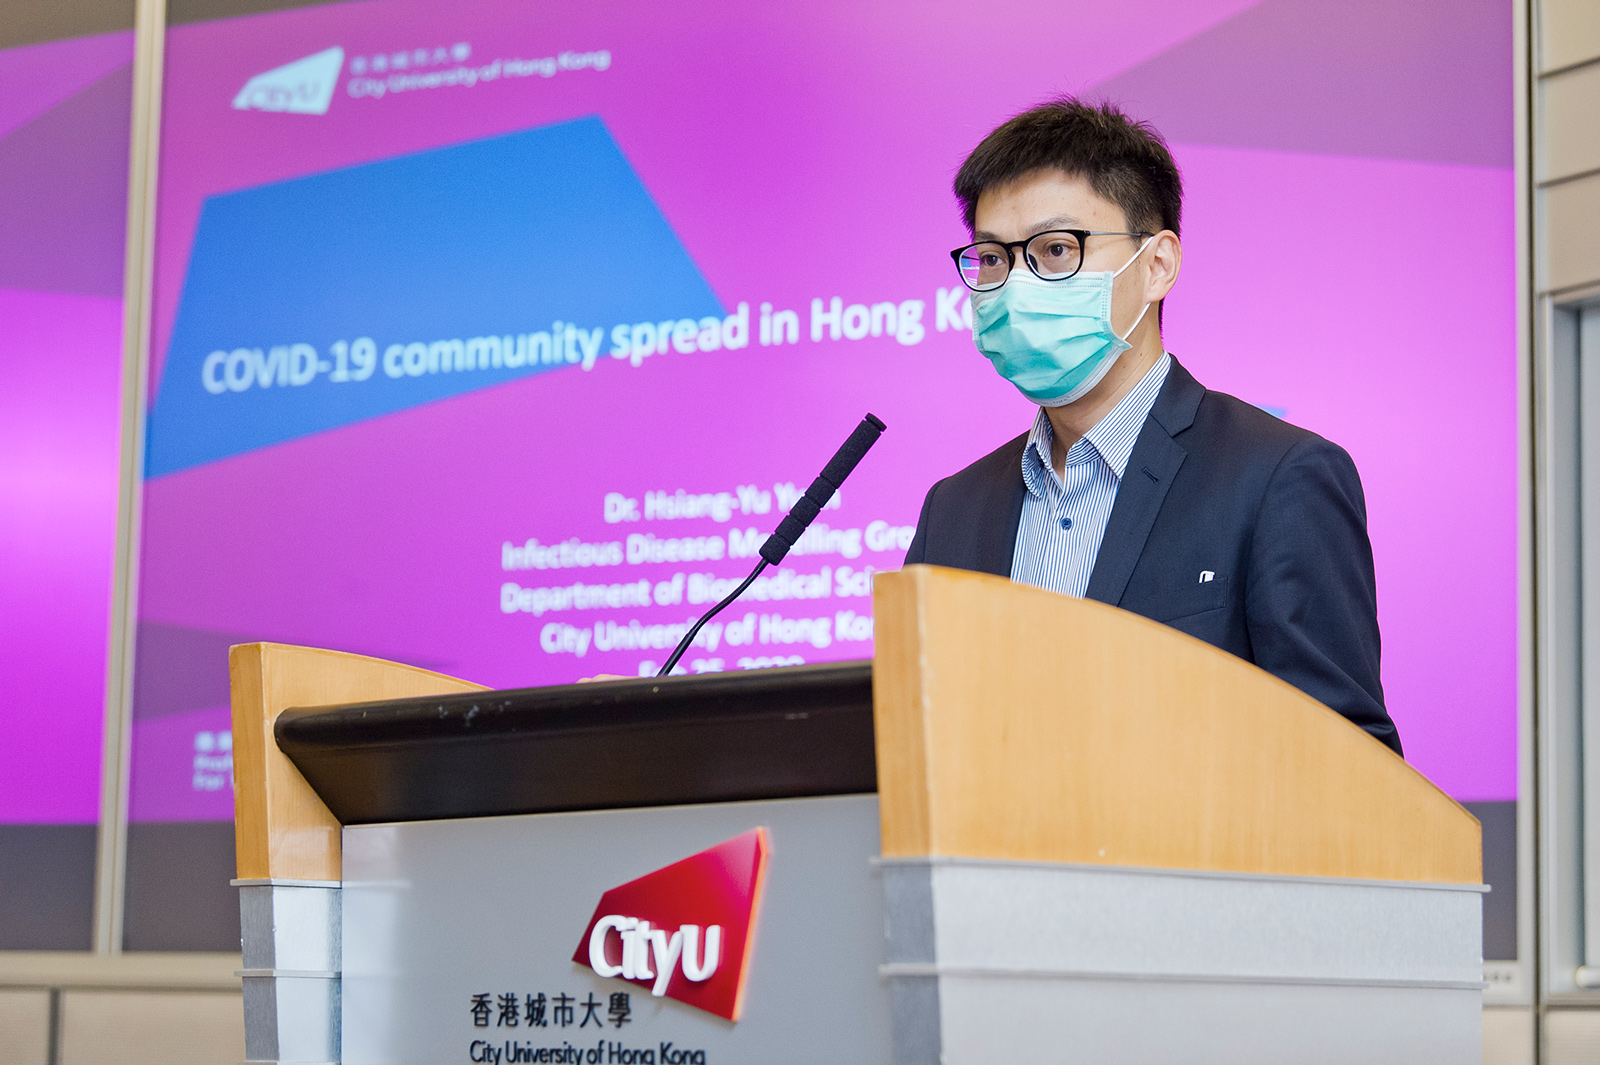 Dr Yuan estimates that infected individuals were quarantined after showing symptoms for around 3.5 days on average, which can result in a possible increase of around 60 infected individuals from mid-February to mid-March.